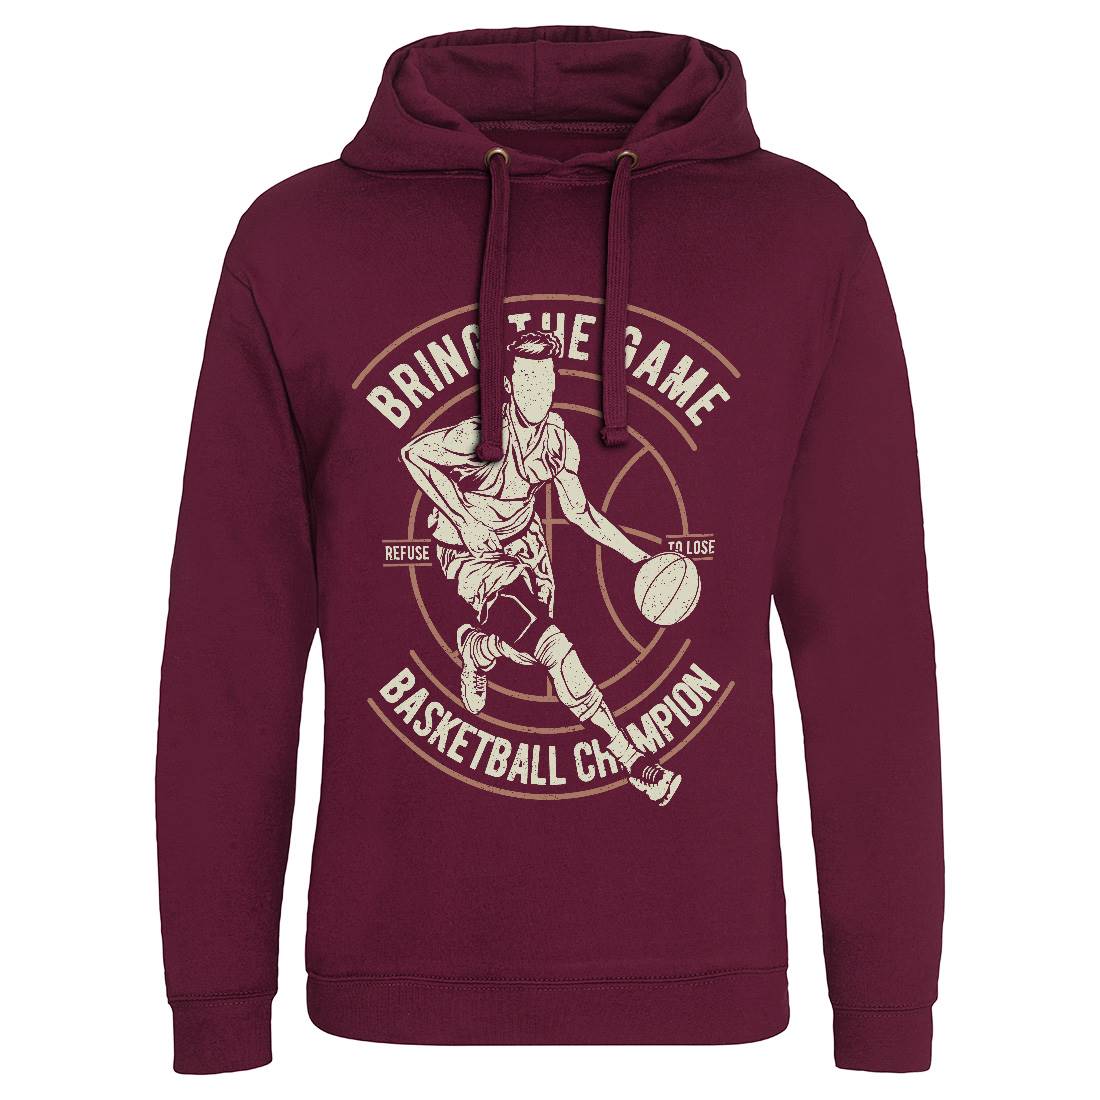 Bring The Game Mens Hoodie Without Pocket Sport A627